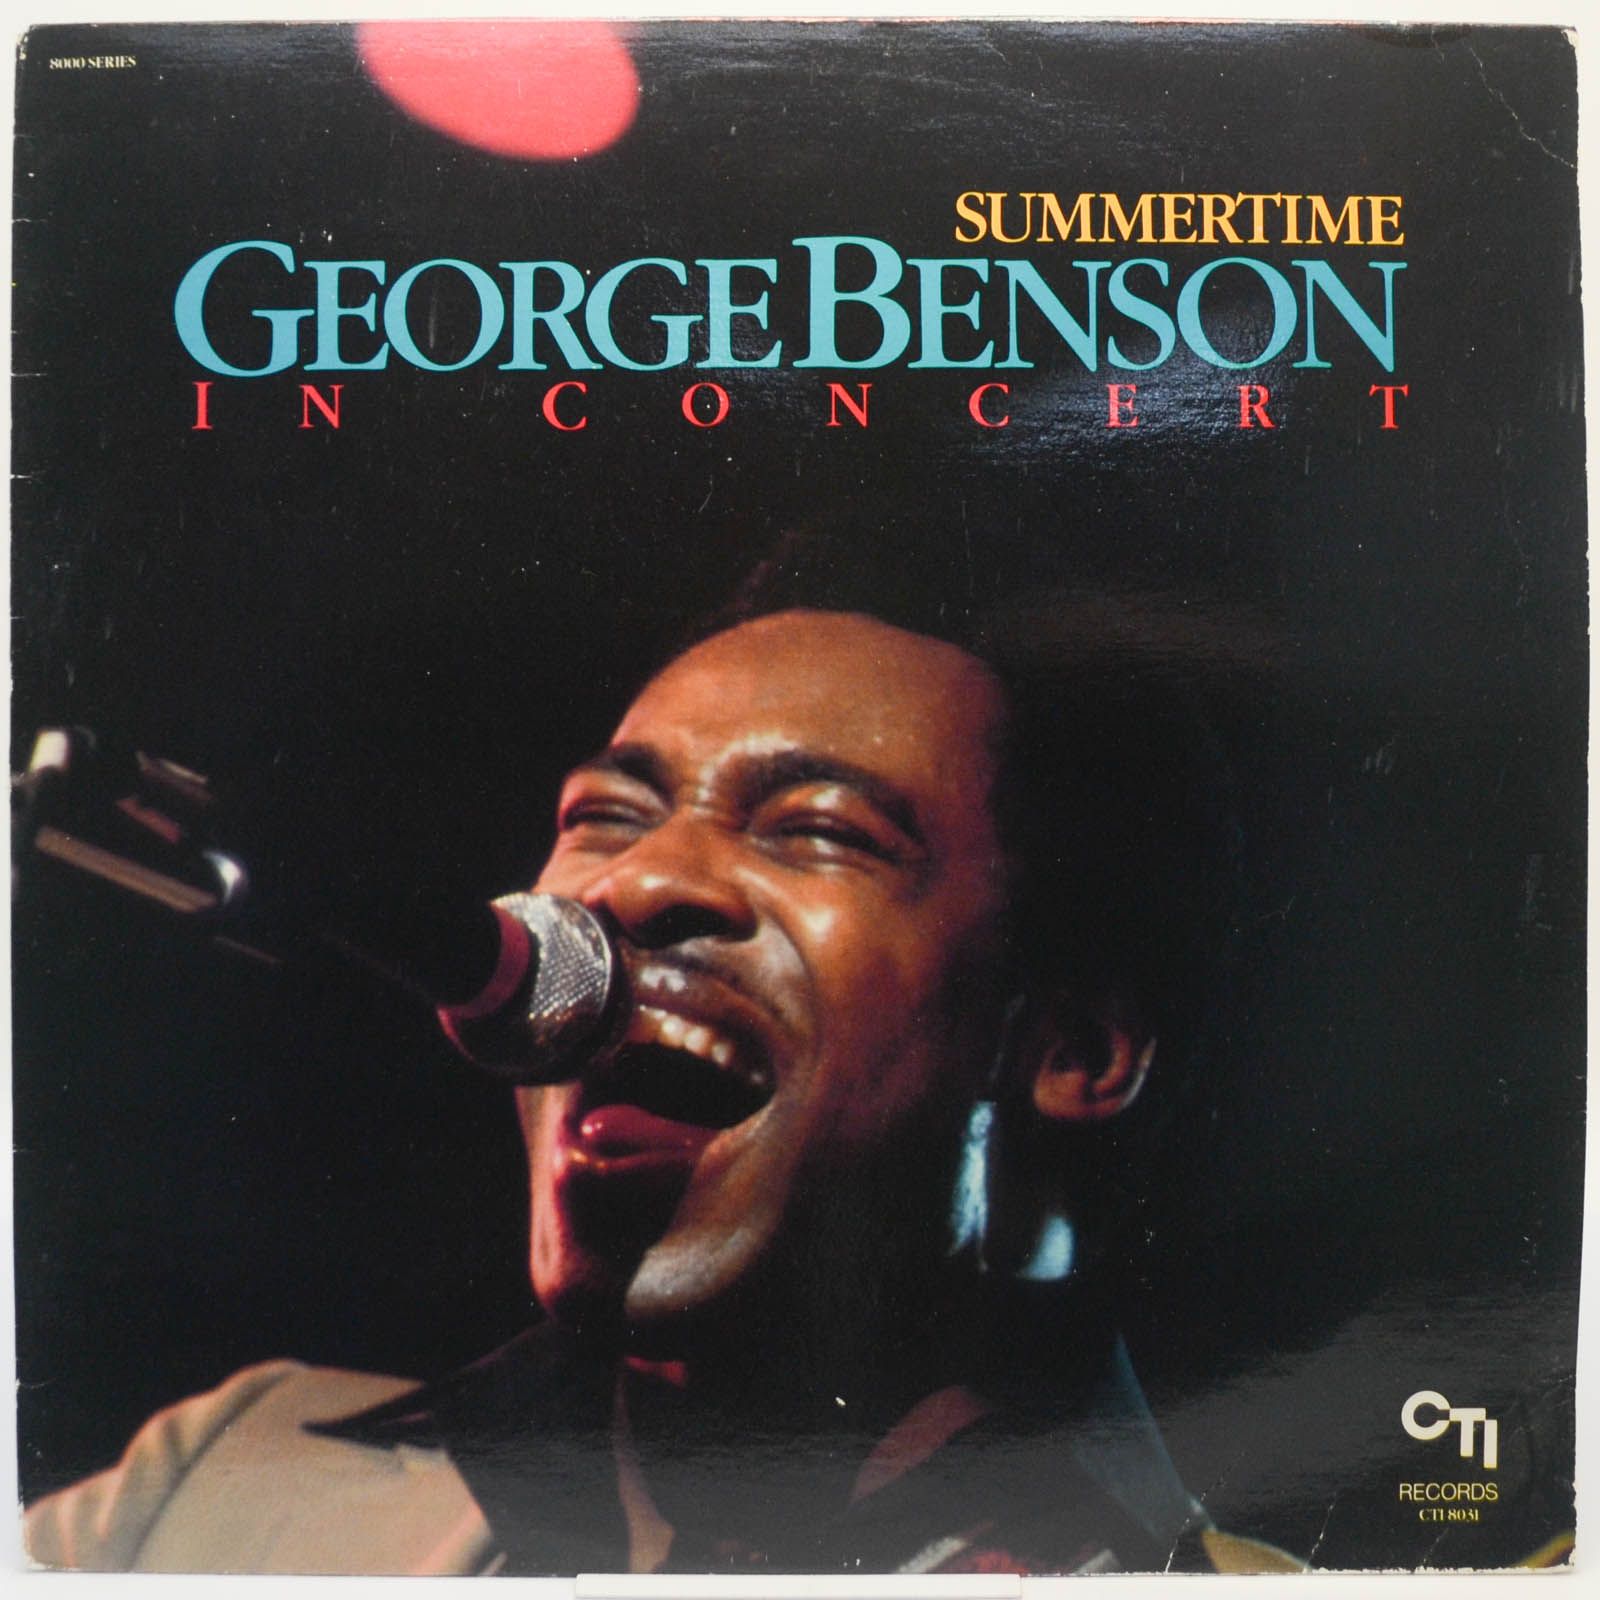 George Benson — In Concert - Summertime (USA), 1976